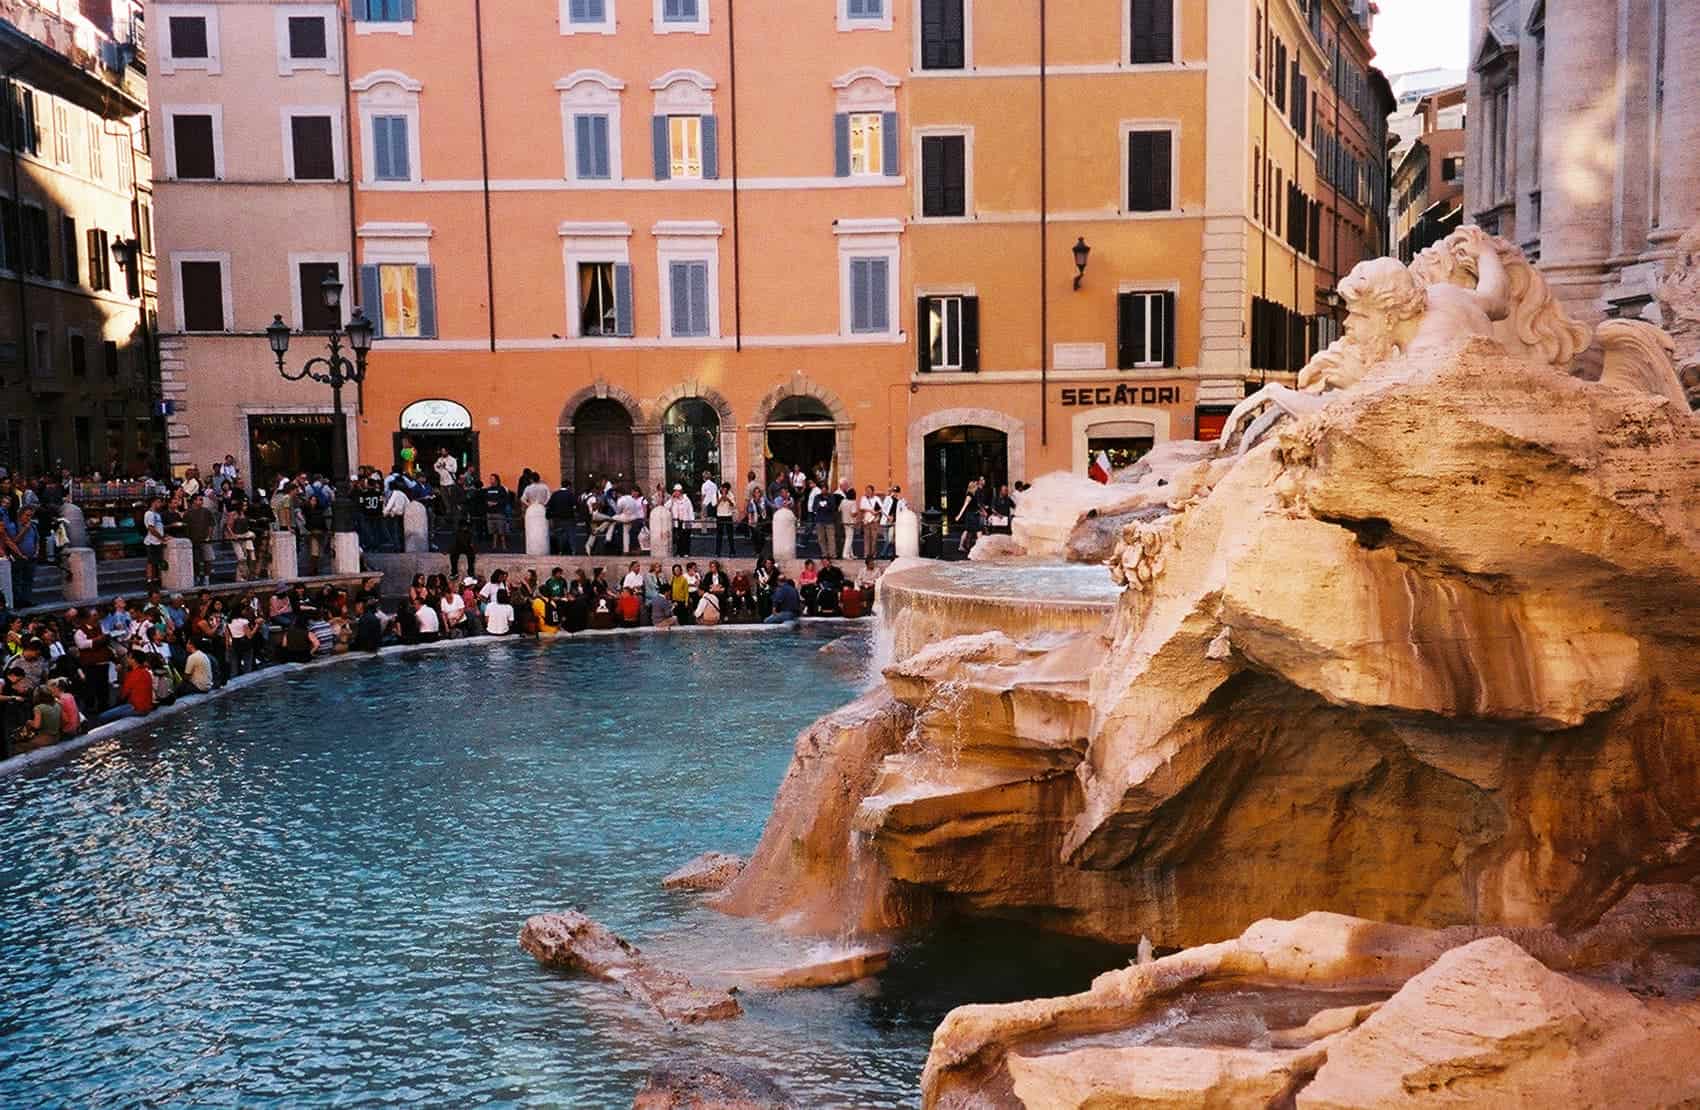 The Trevi Fountain in Rome. Credit: Chris Yunker (Flickr)